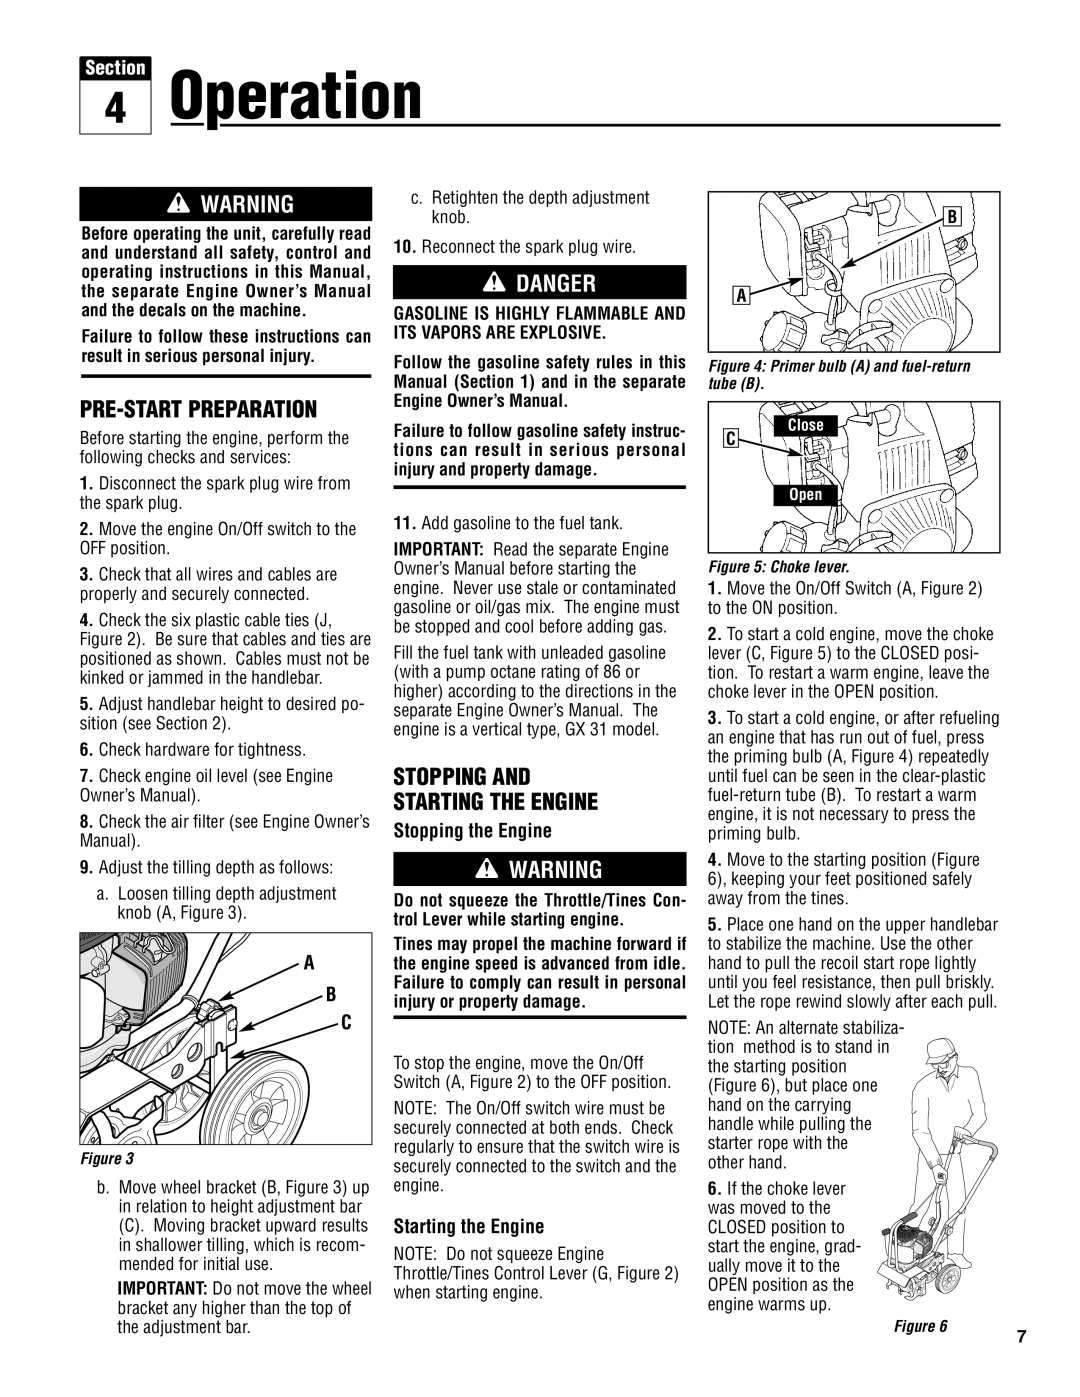 Troy-Bilt 148H Operation, Pre-Start Preparation, Stopping And Starting The Engine, Stopping the Engine, Danger, Section 